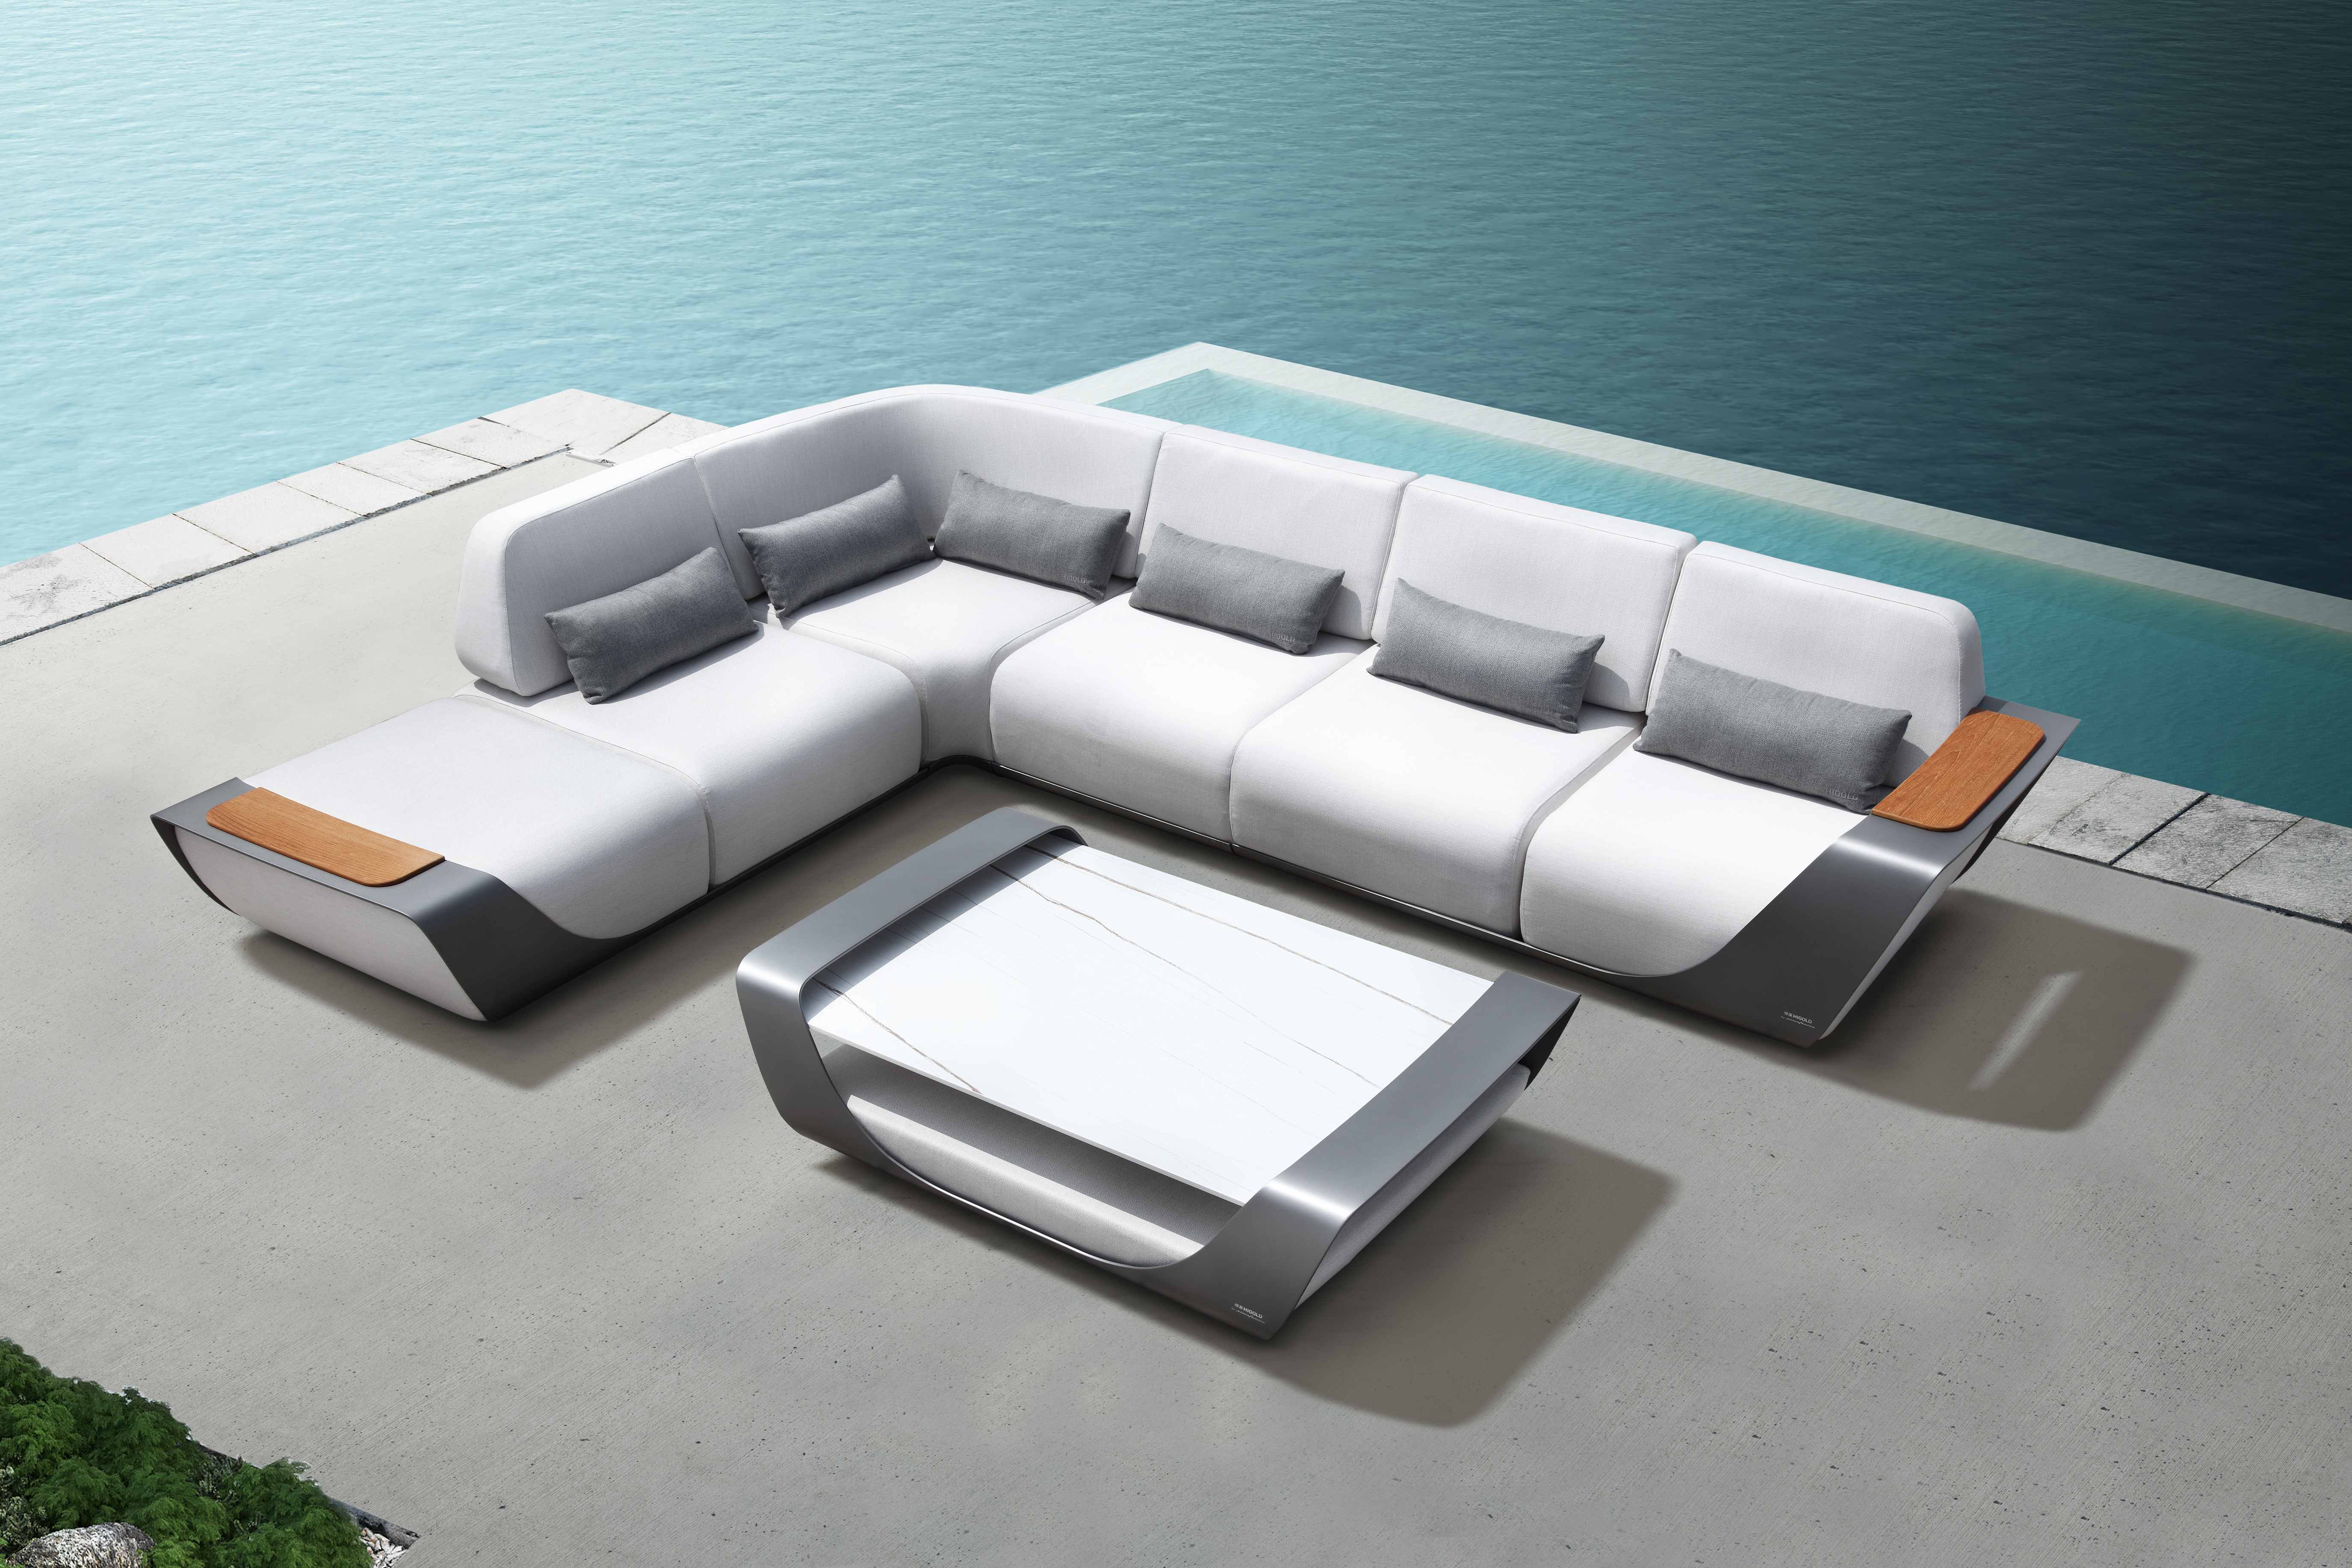 Onda patio conversation set with leather surface